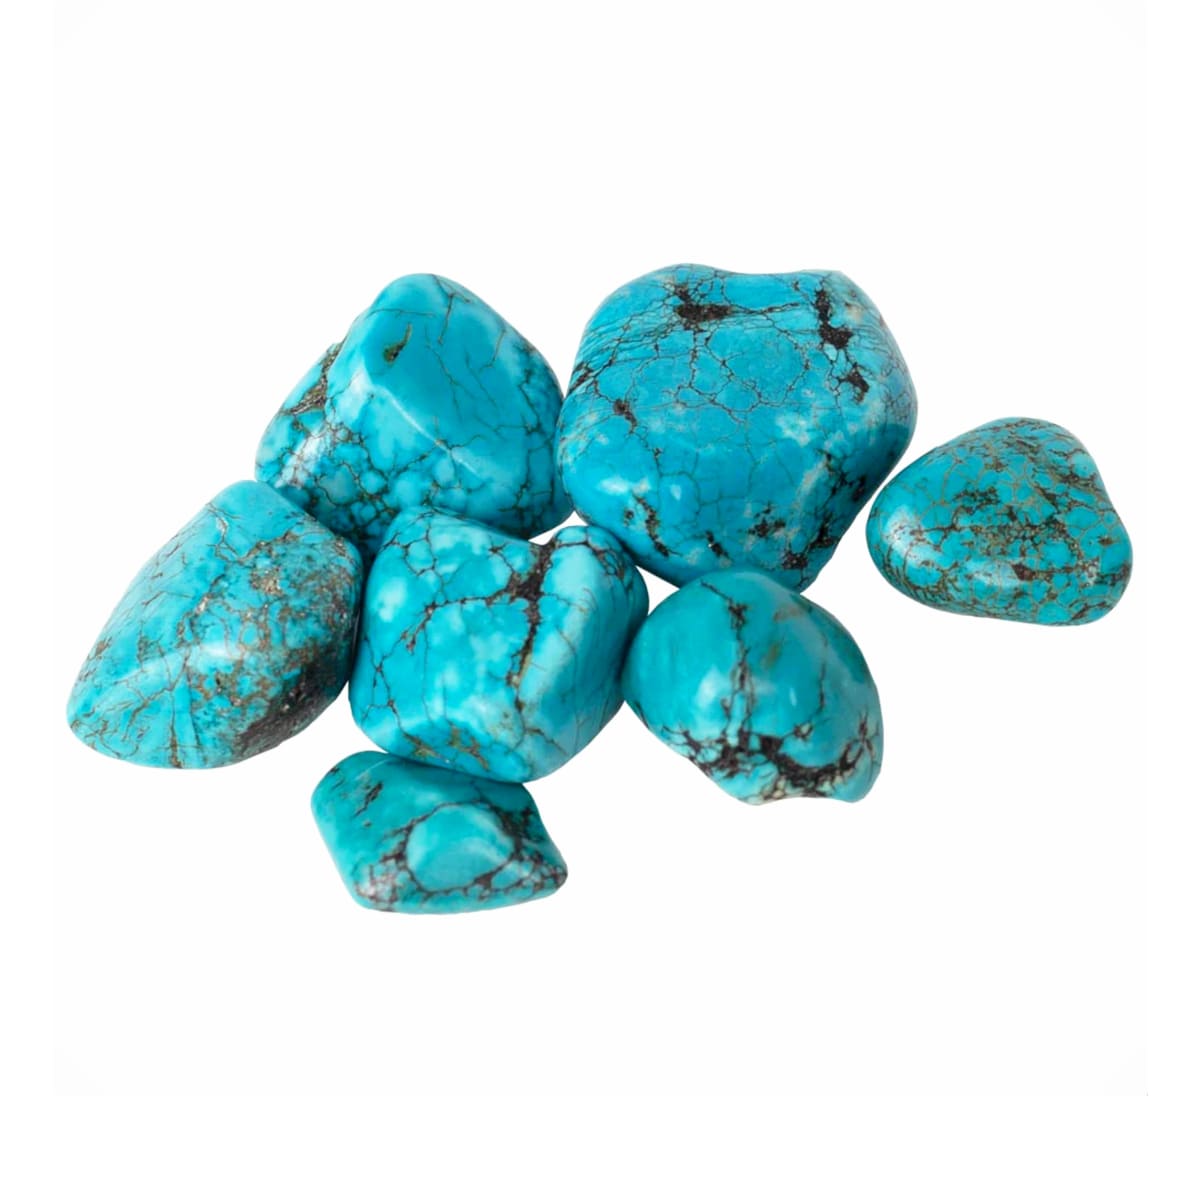 Blue Turquoise Tumbled Crystals